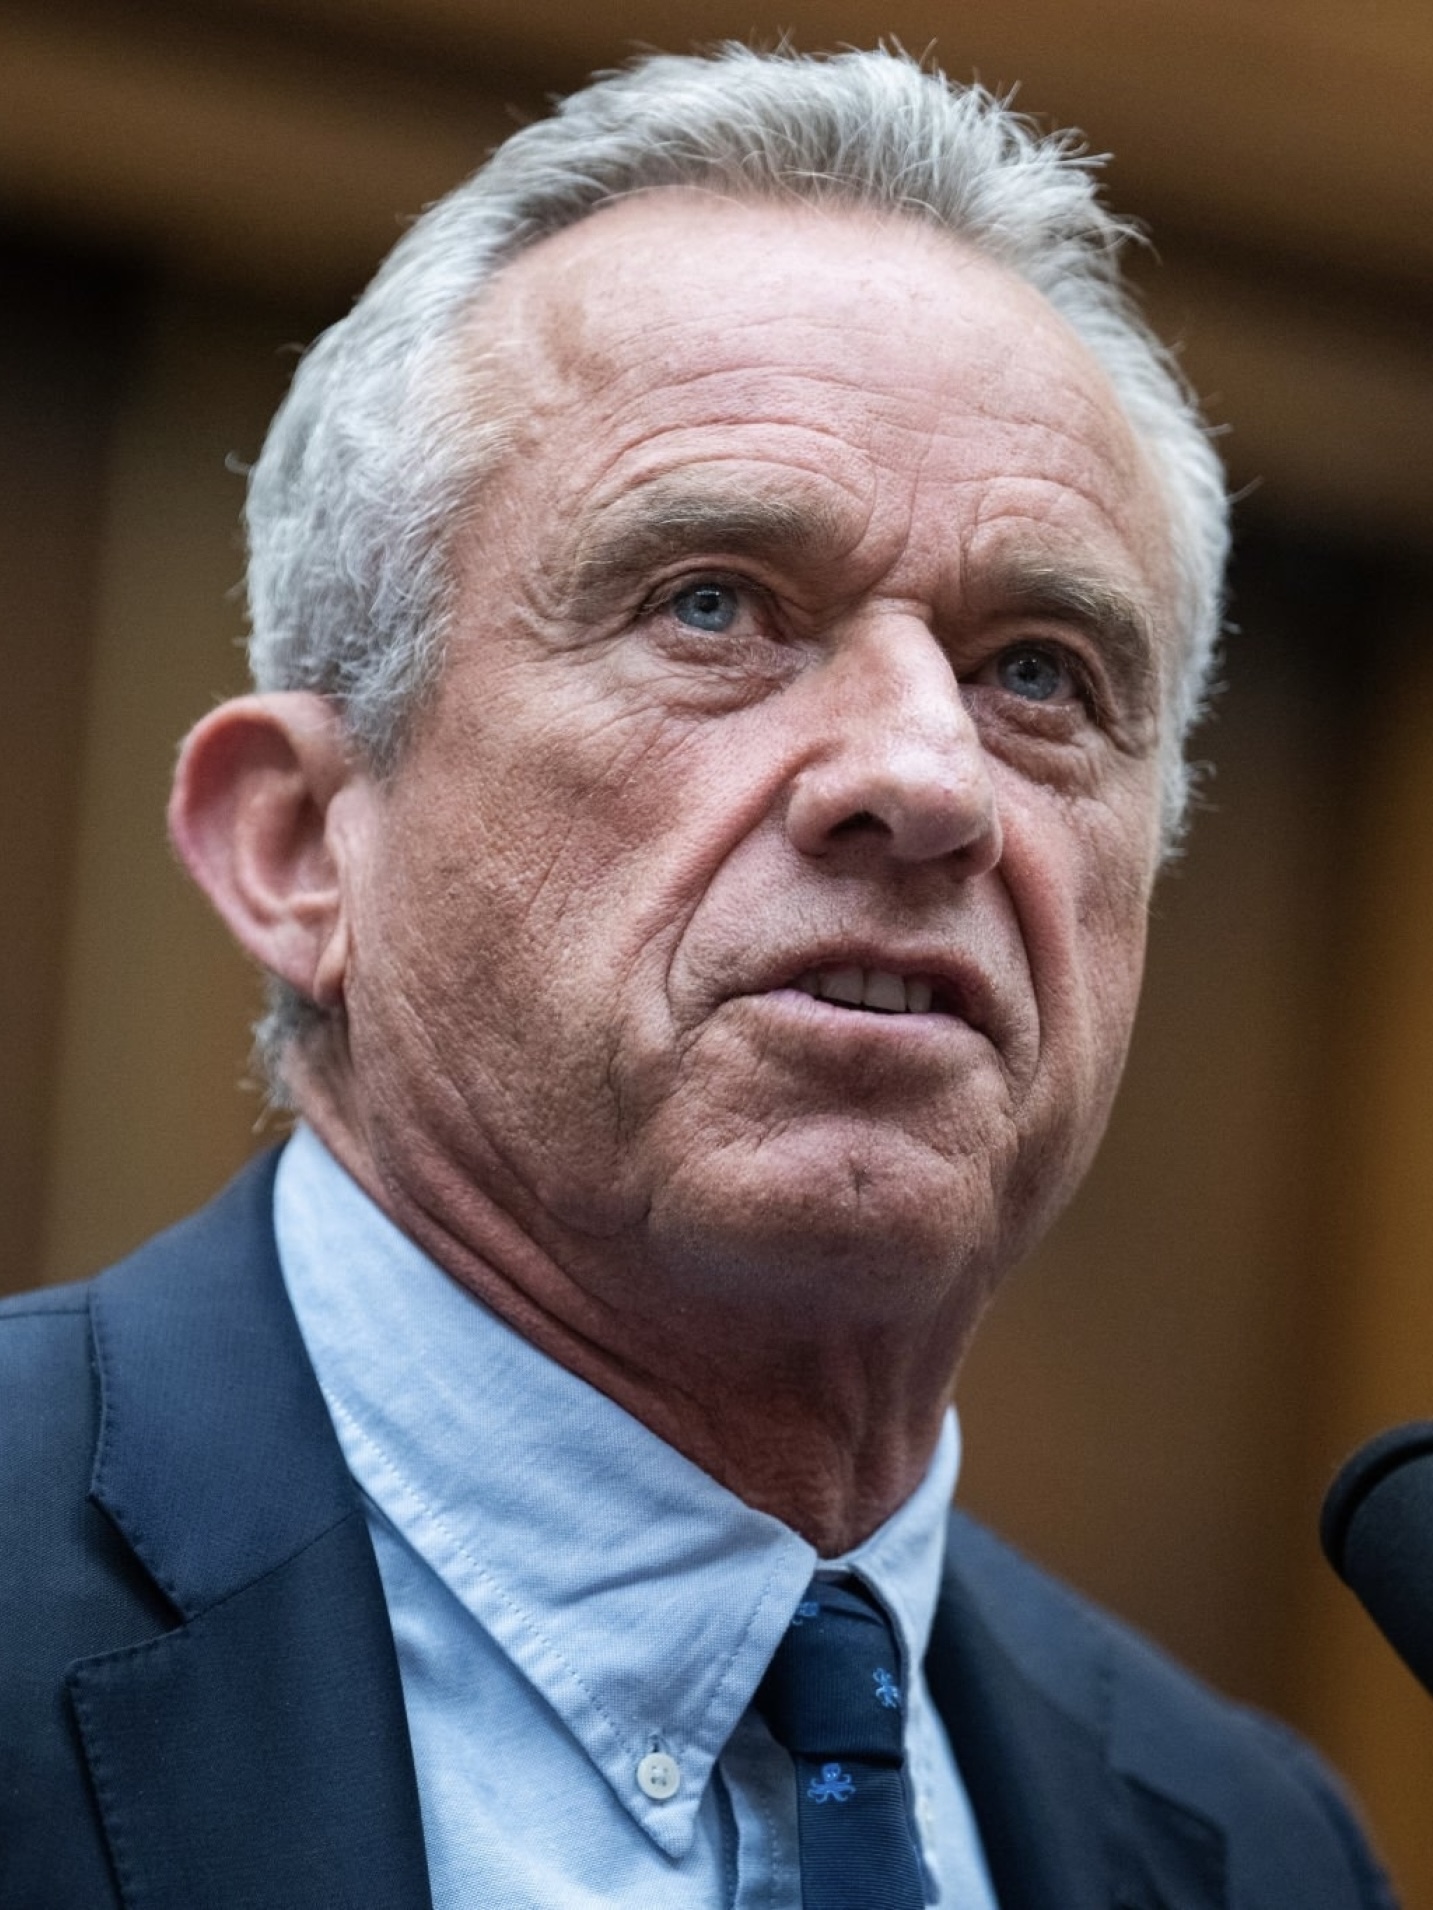 A NEW PRESIDENT KENNEDY? Biden and New York Times in total panic over RFK Jr 😬